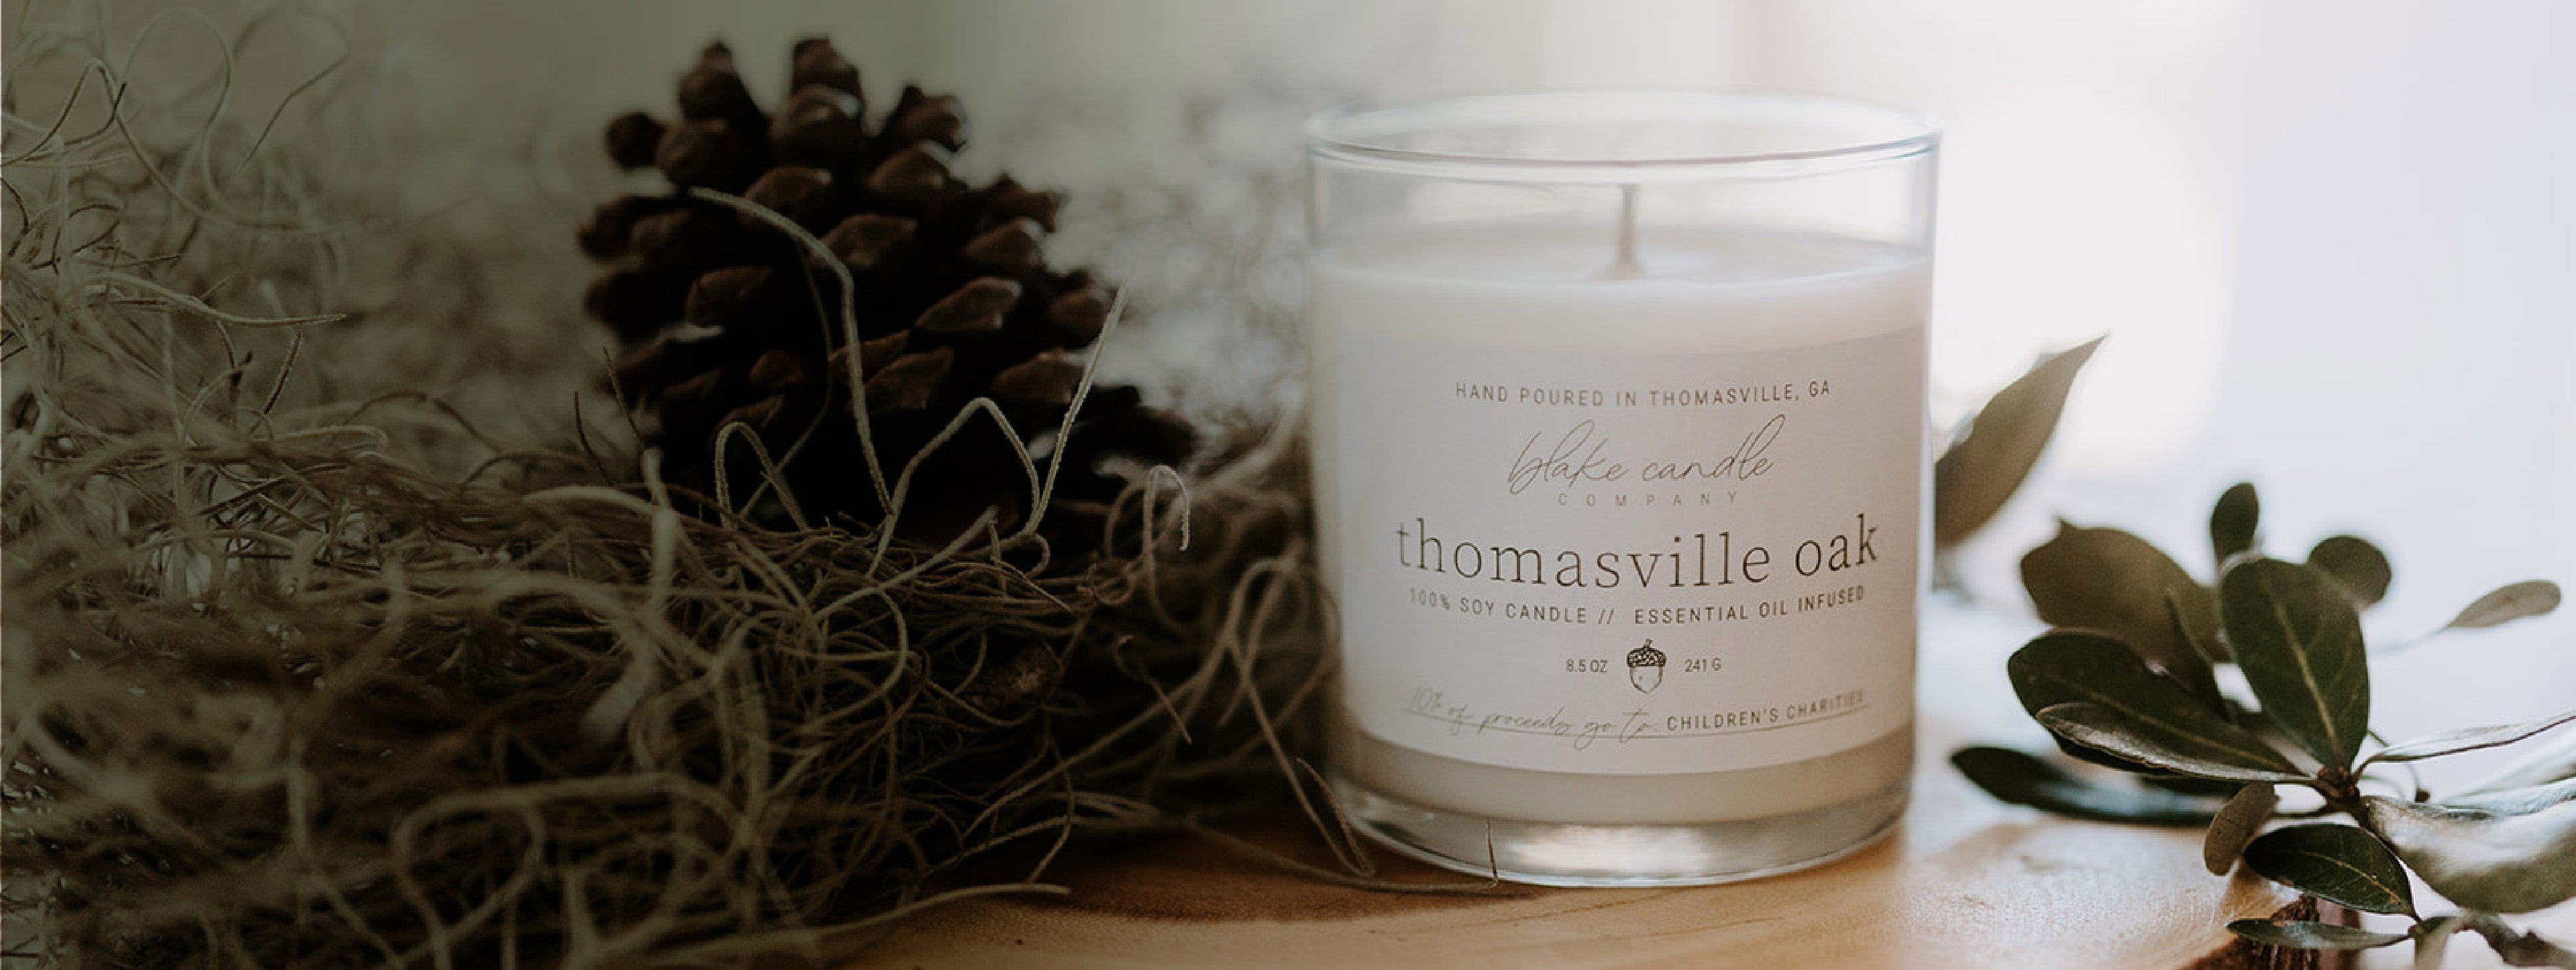 100% soy wax candle in thomasville oak scent on table top with greenery